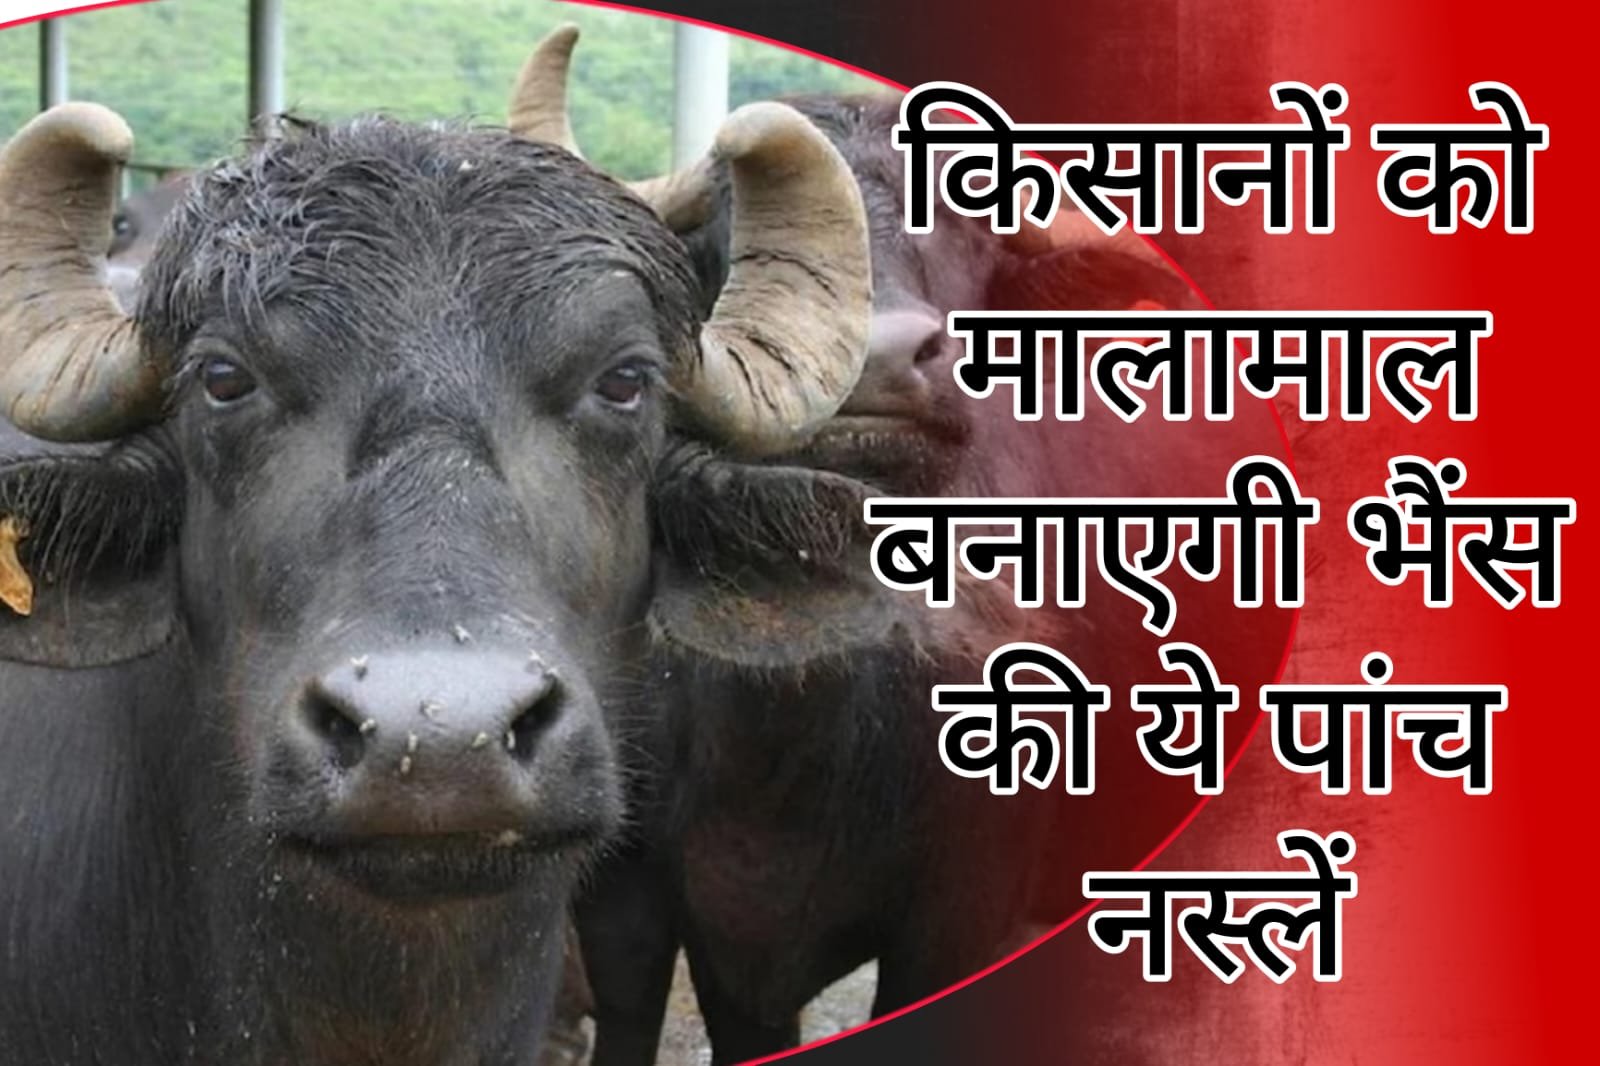 Bhains Ki Breed - These five breeds of buffalo will make farmers rich